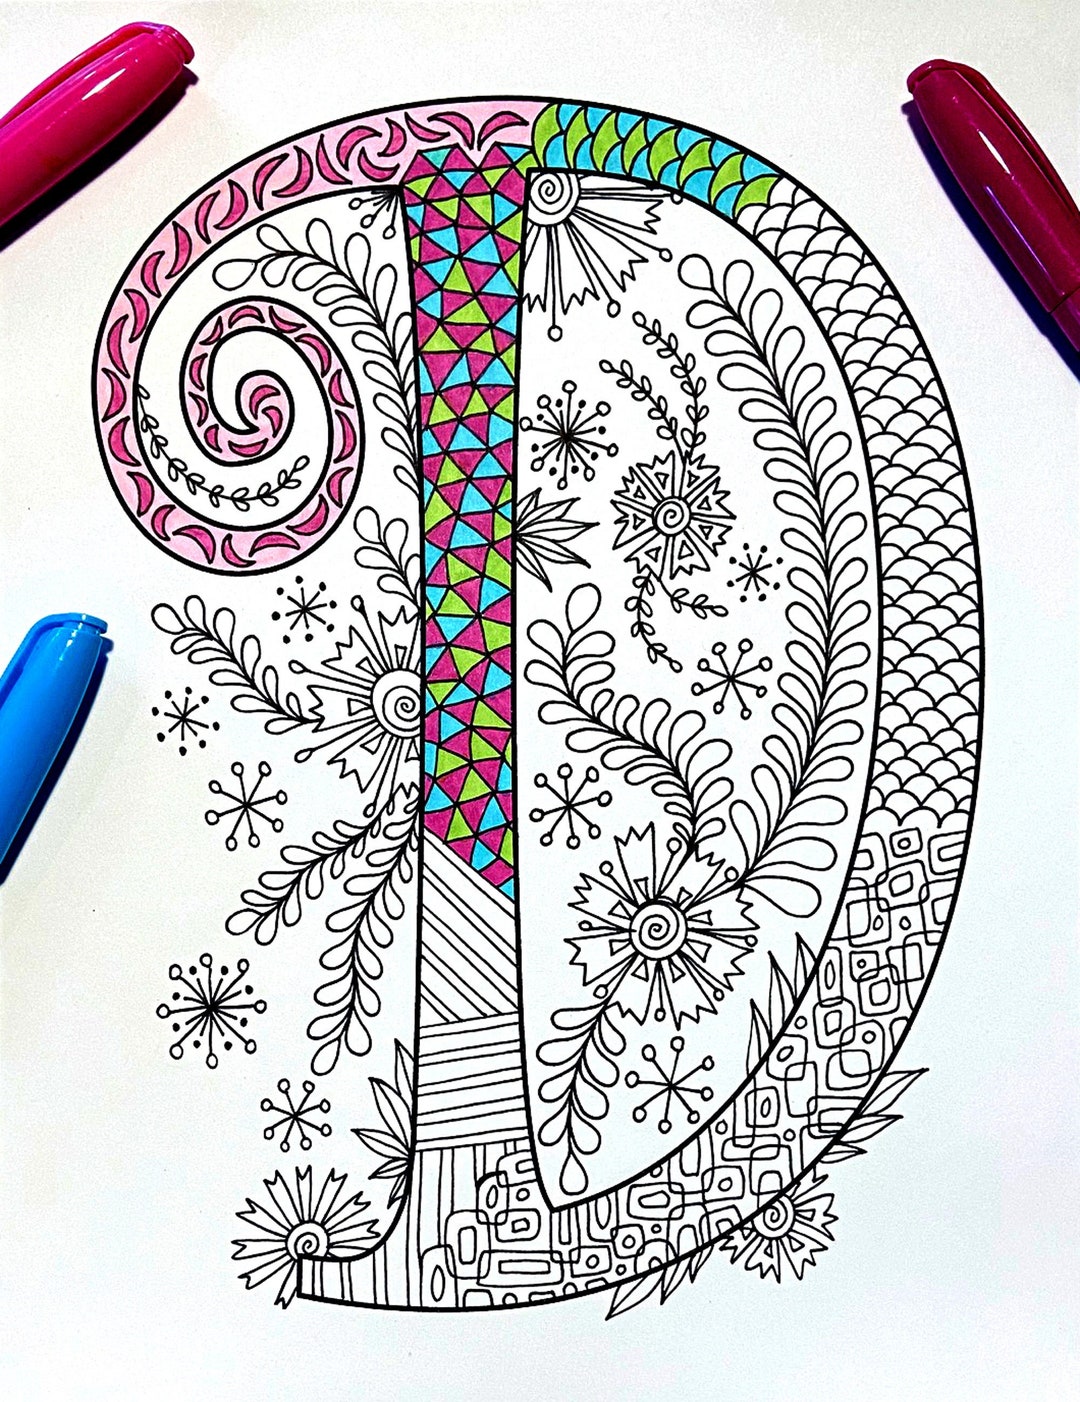 Retro Floral Letter D Coloring Page Inspired by the Font - Etsy